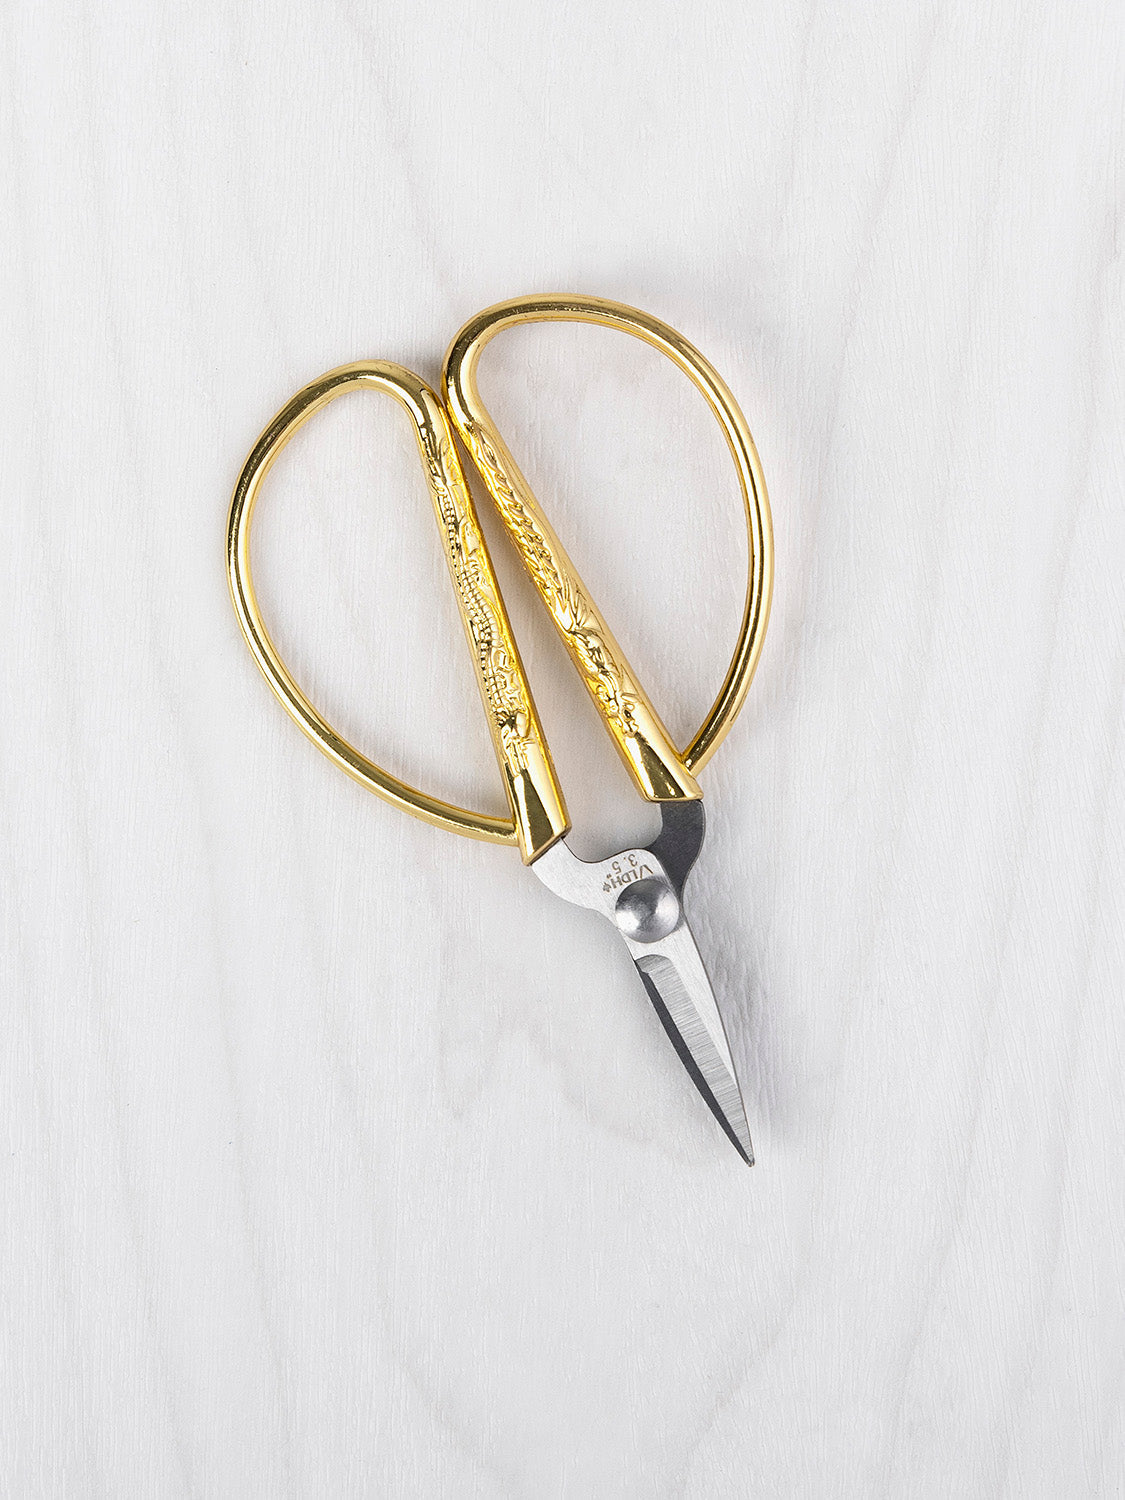 Tiny LDH Scissors/Snips with Embossed Gold Handles